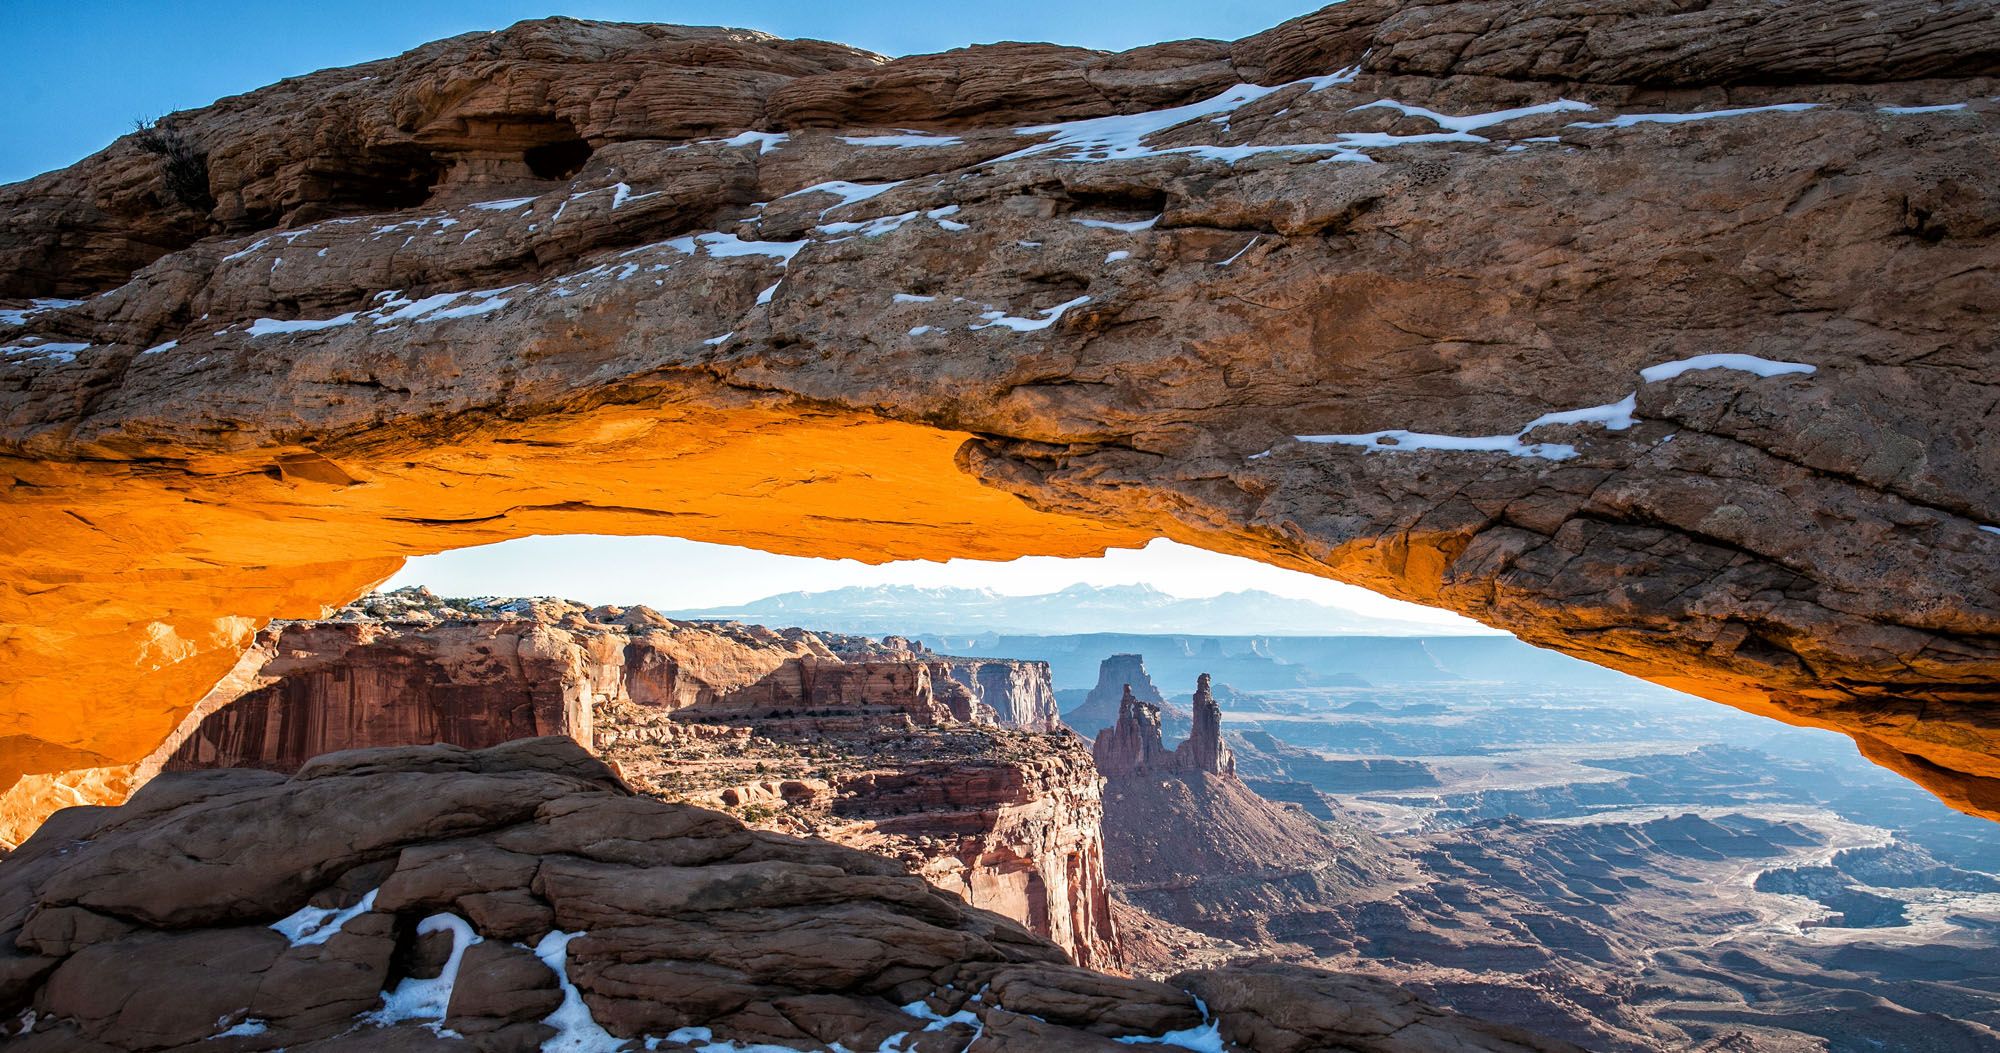 Best things to do in Canyonlands